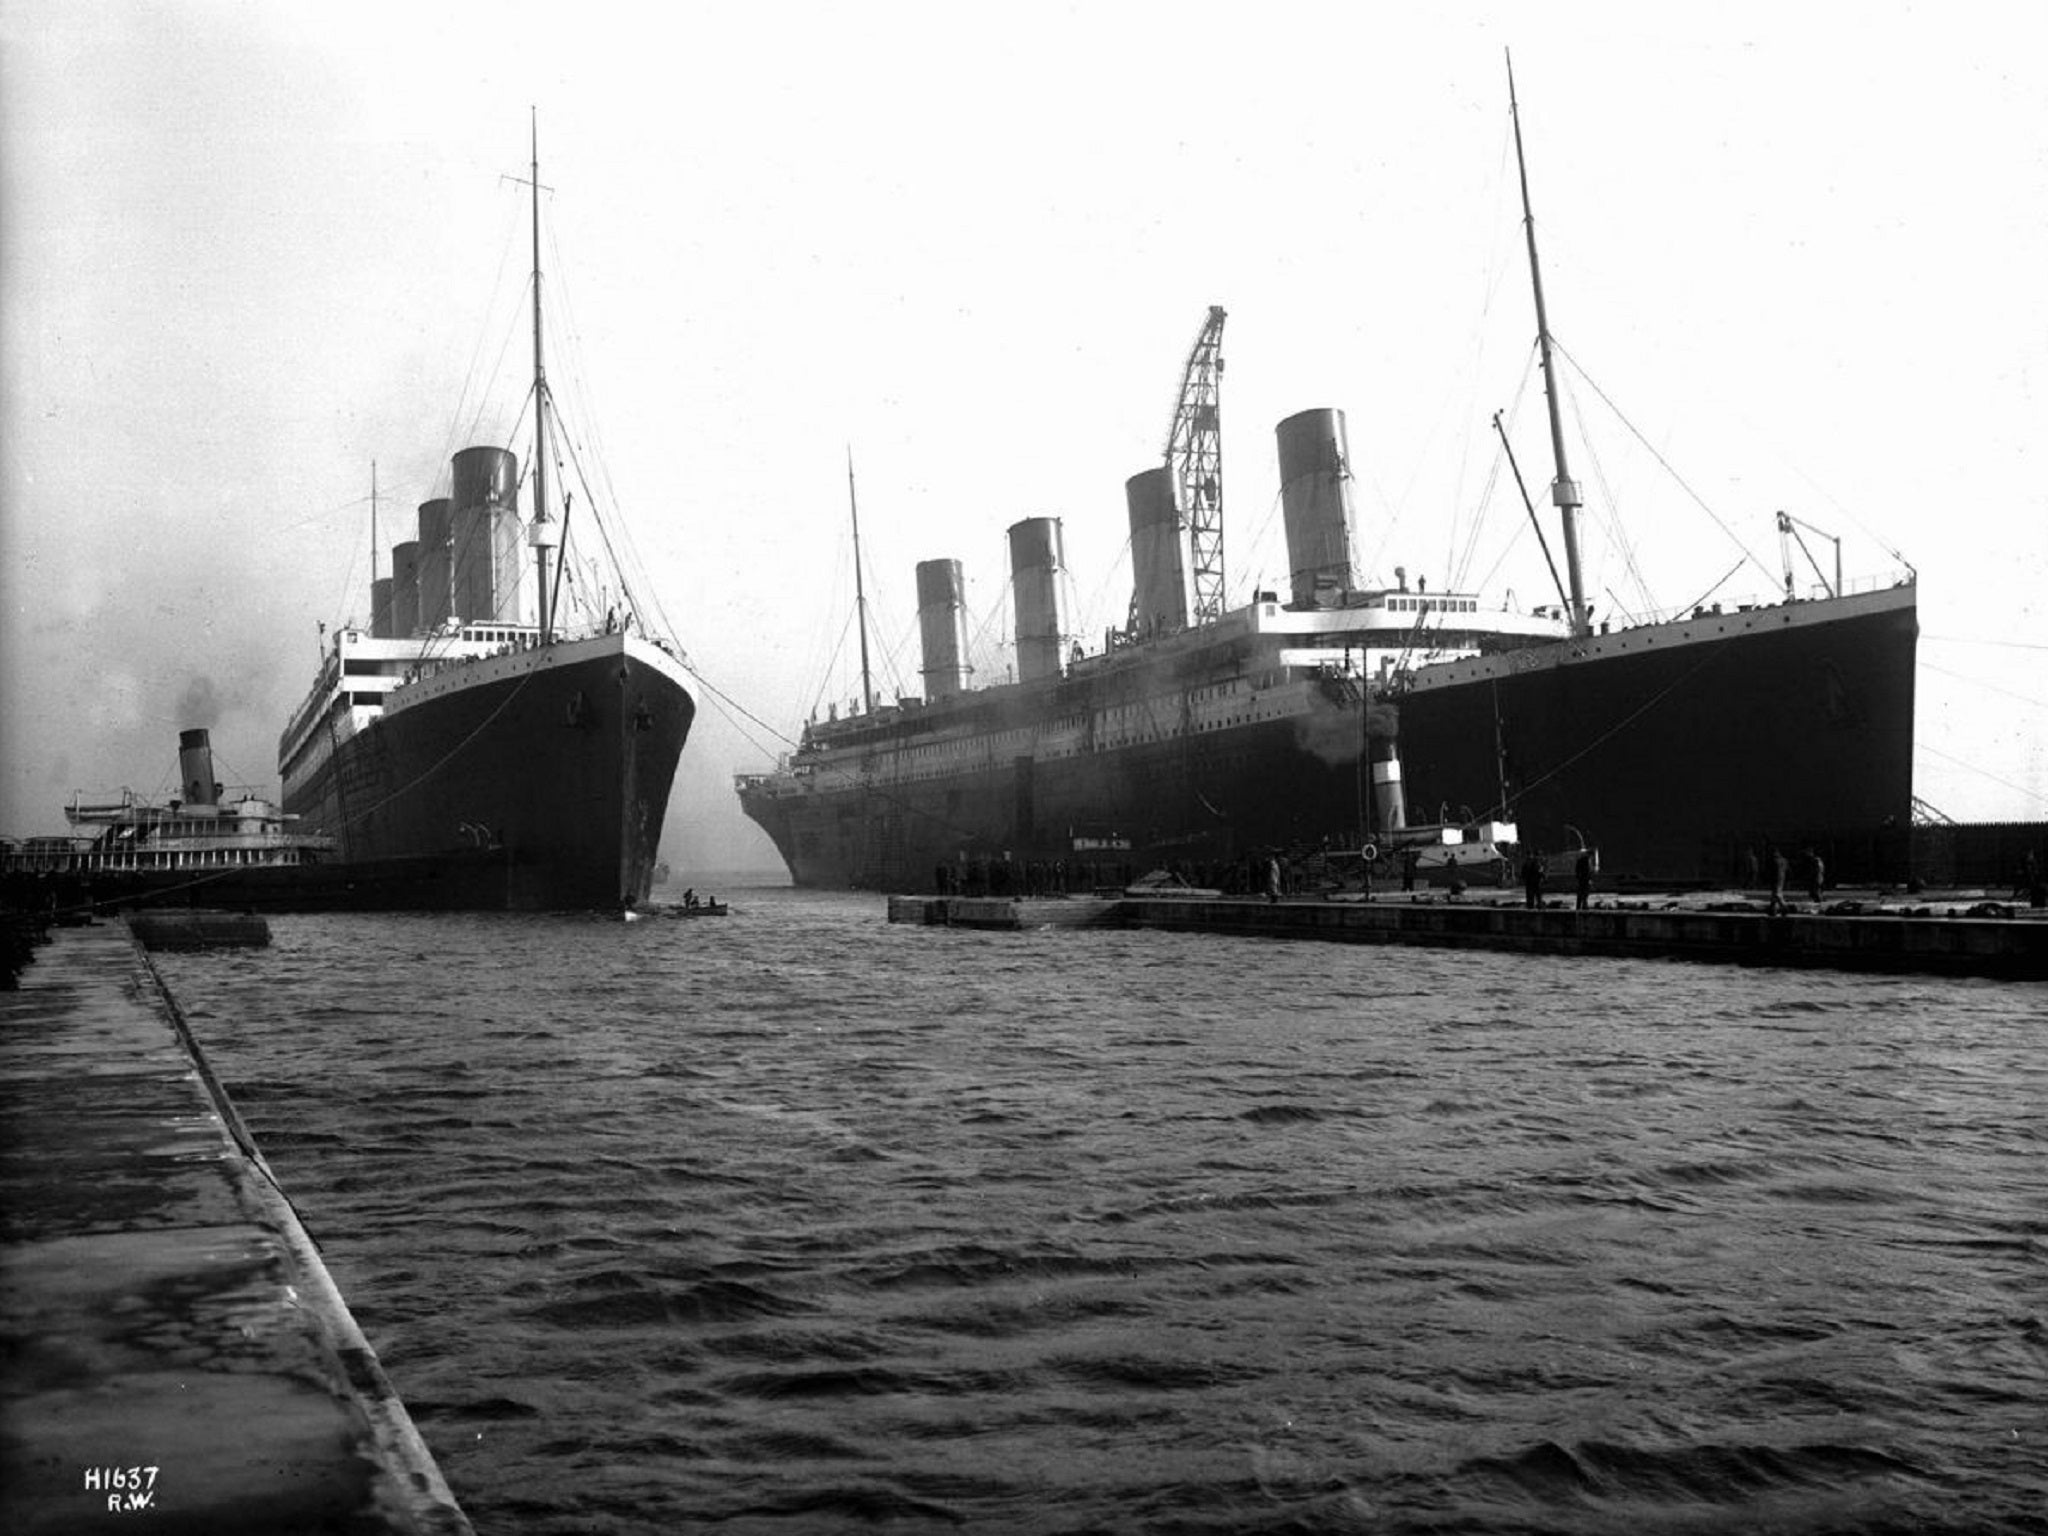 The Titanic and Britannic side by side in Southampton docks